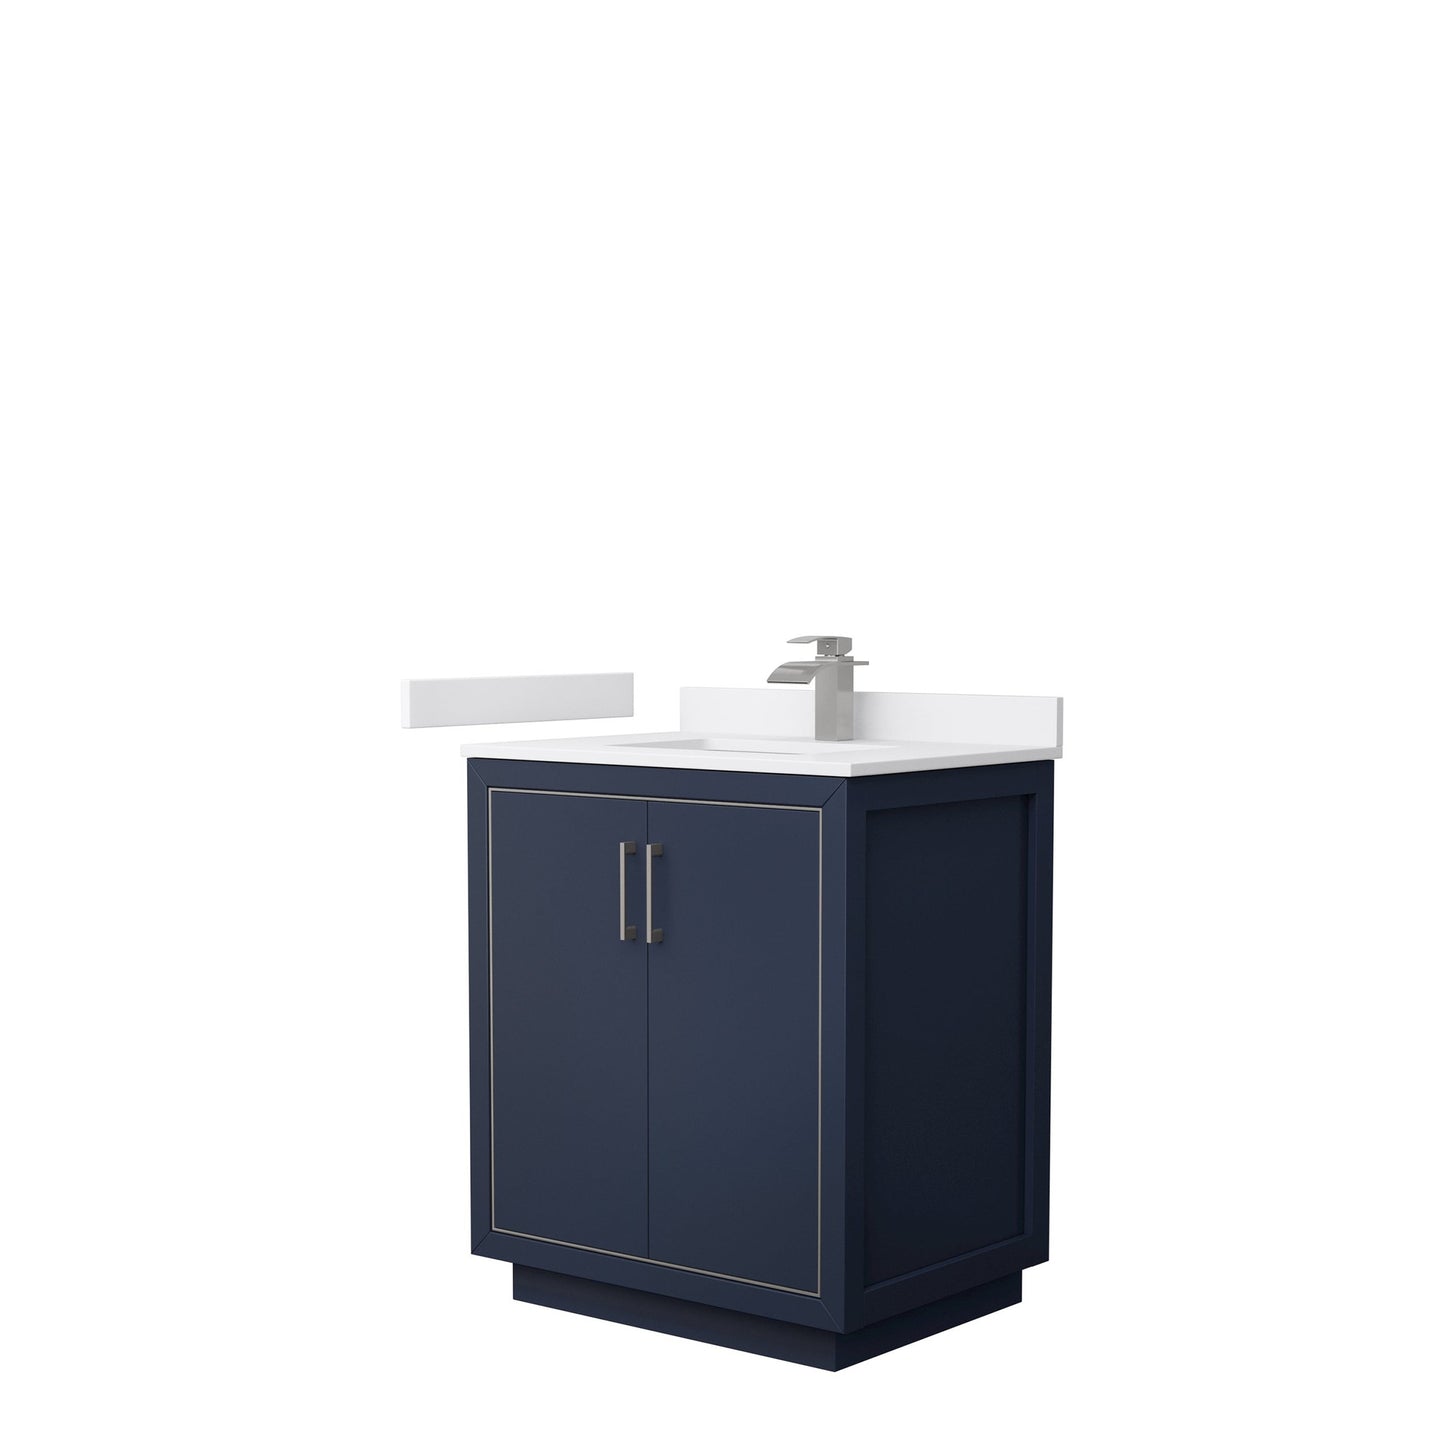 Wyndham Collection Icon 30" Single Bathroom Vanity in Dark Blue, White Cultured Marble Countertop, Undermount Square Sink, Brushed Nickel Trim